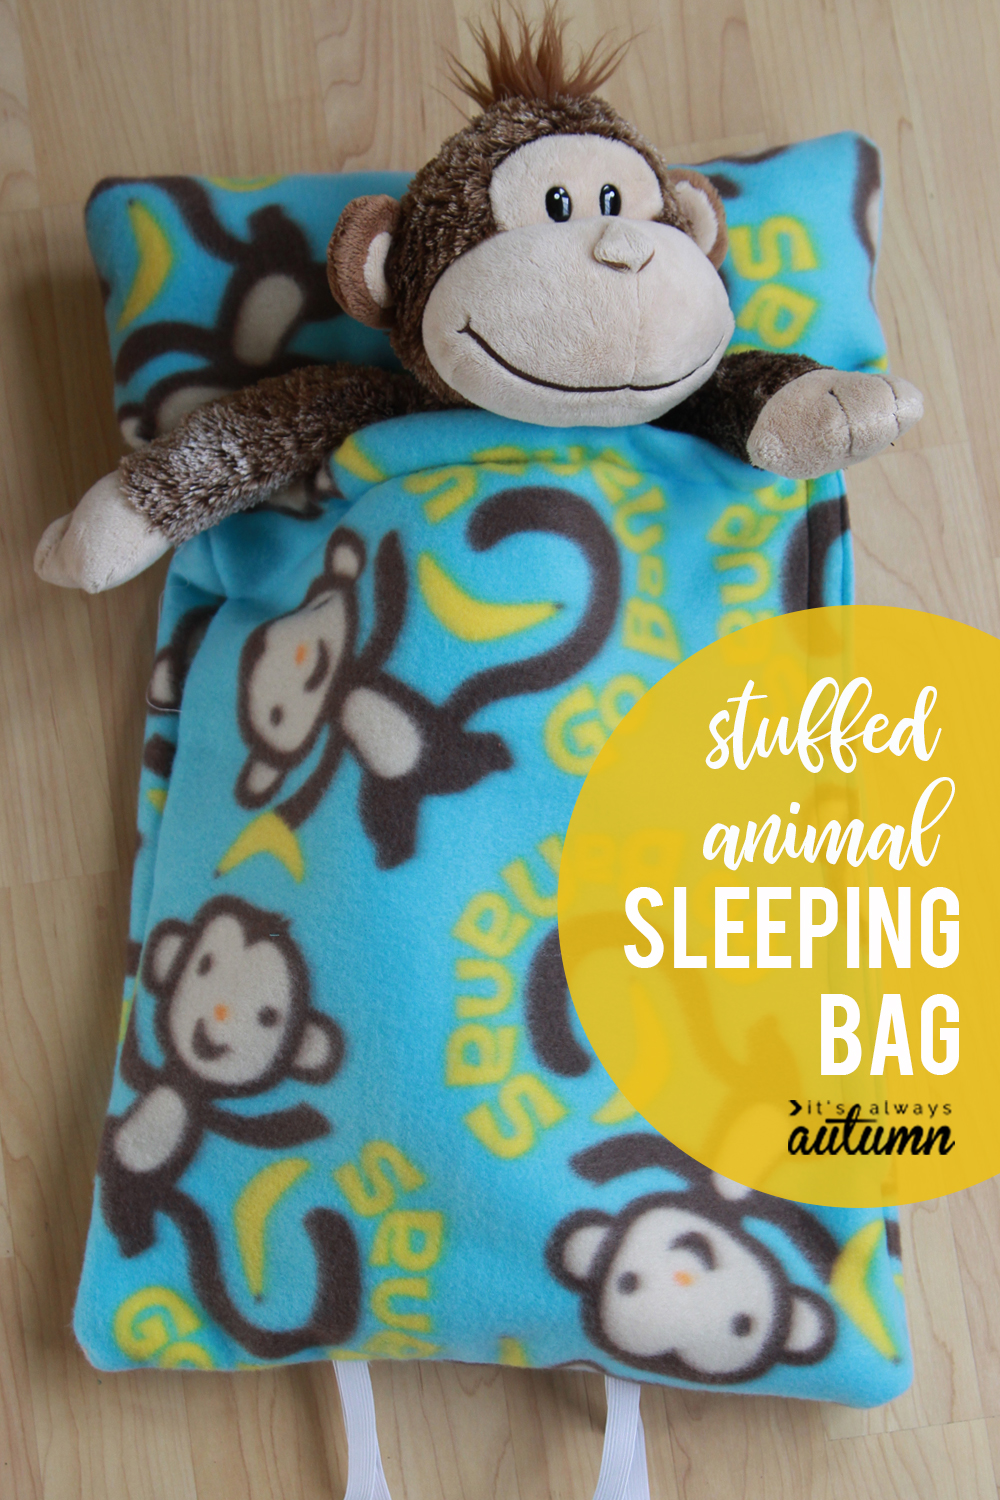 Learn how to make a stuffed animal sleeping bag with this easy sewing tutorial and free pattern.